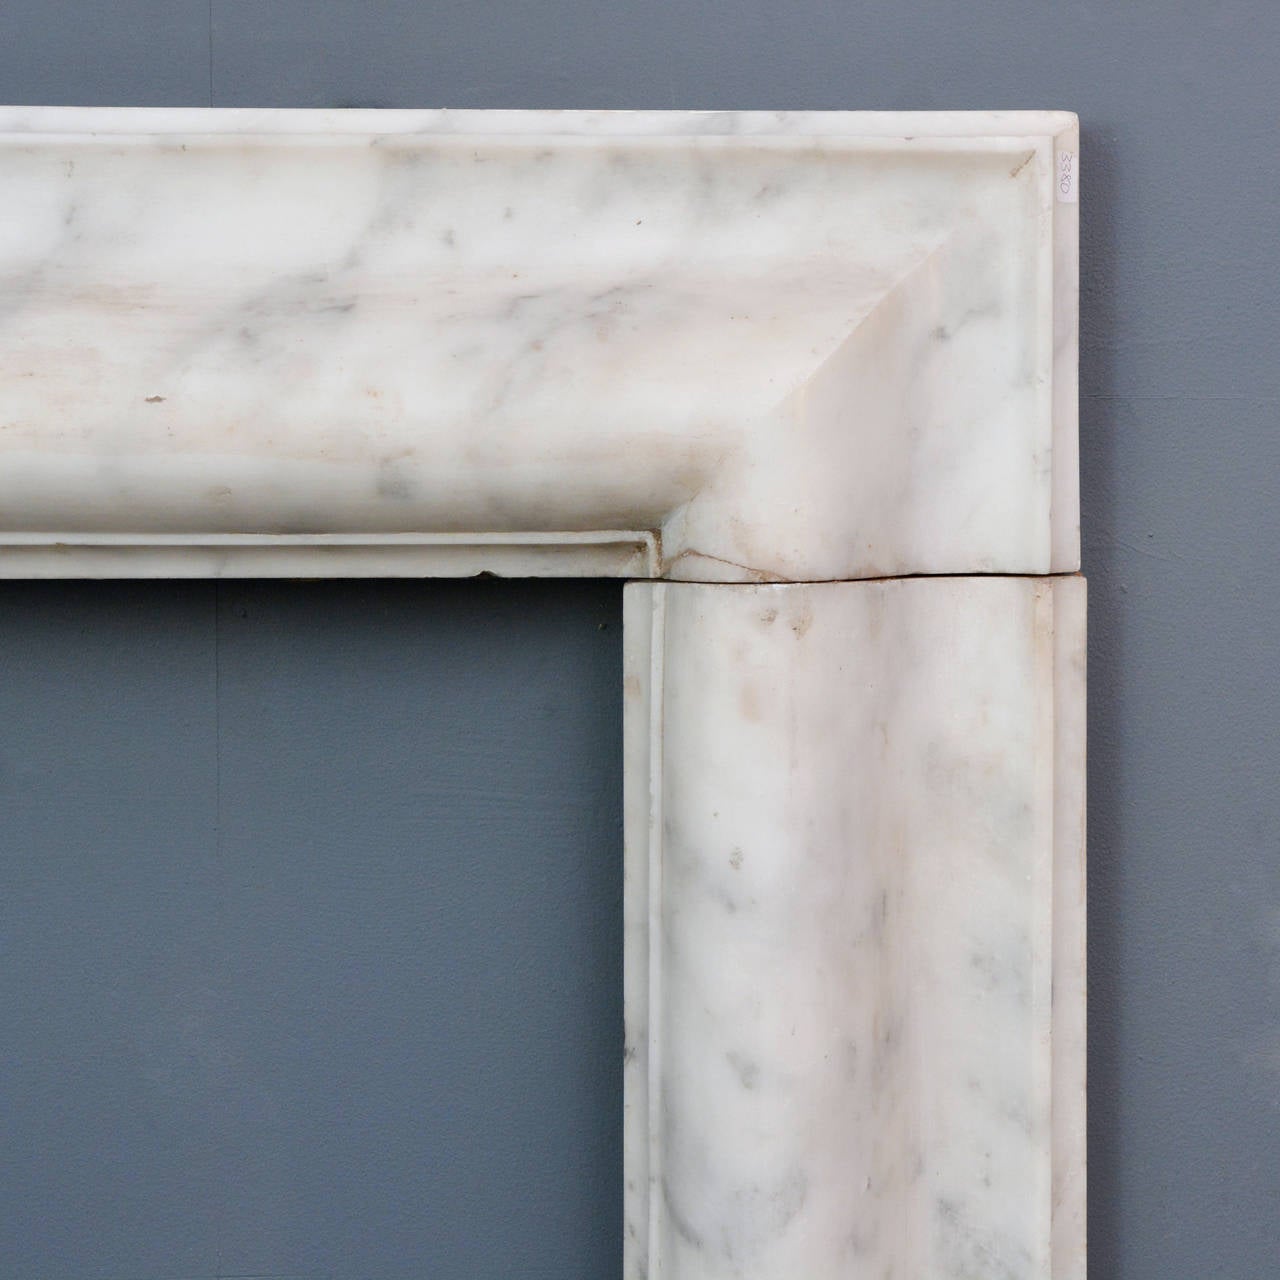 A Carrara marble bolection fire surround, nineteenth century, with typical ogee moulded frieze and jambs, on square footblocks.

Available to view at Brunswick House, London.

118.5cm high, 139.5cm wide